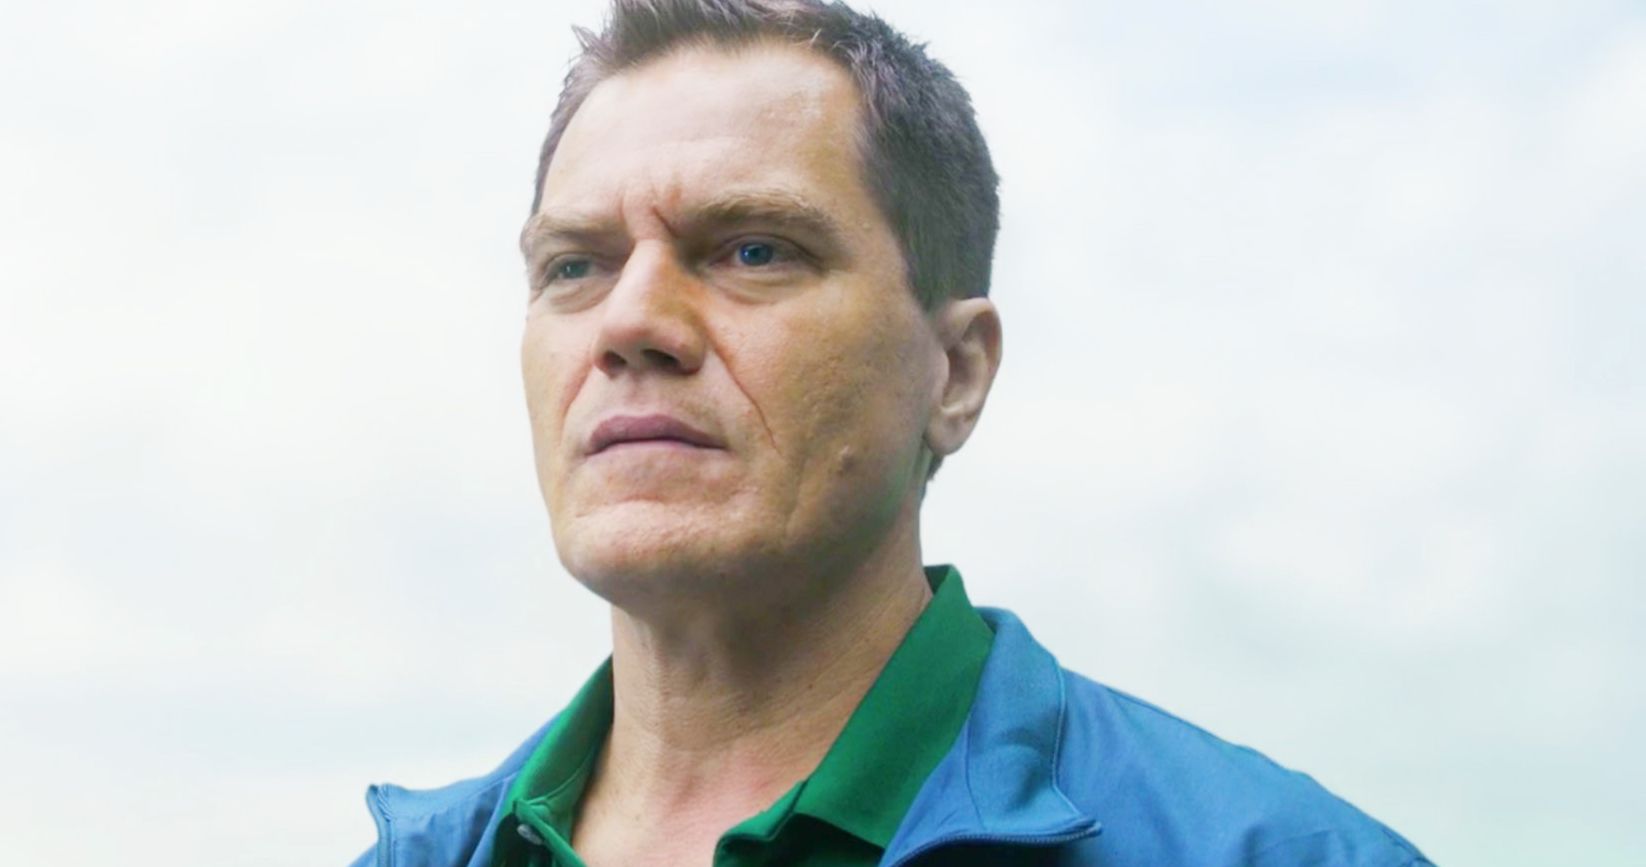 Heart of Champions Trailer: Michael Shannon Teaches Us How to Be a Team